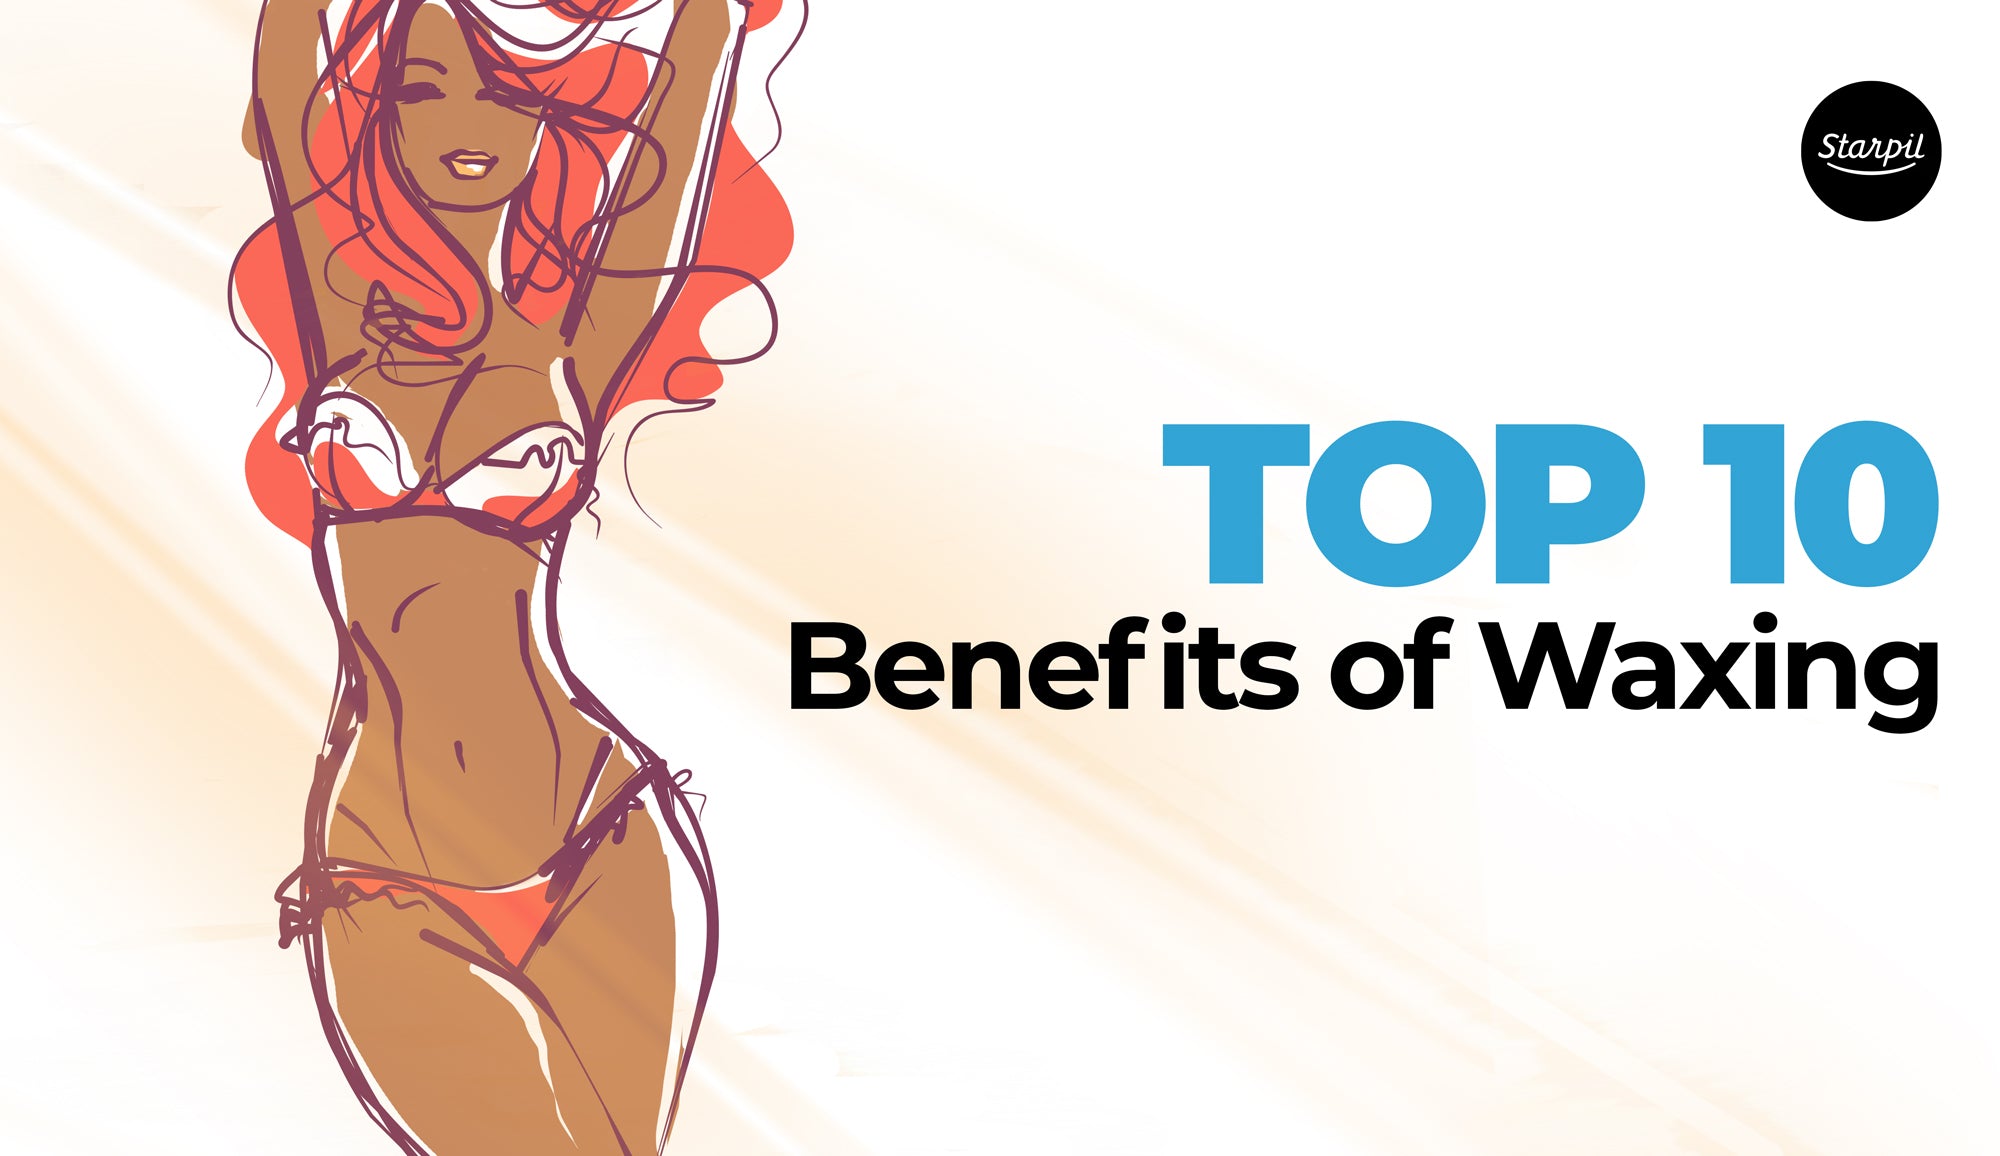 Top 10 Benefits of Waxing (Everything You Should Know) Starpil pic